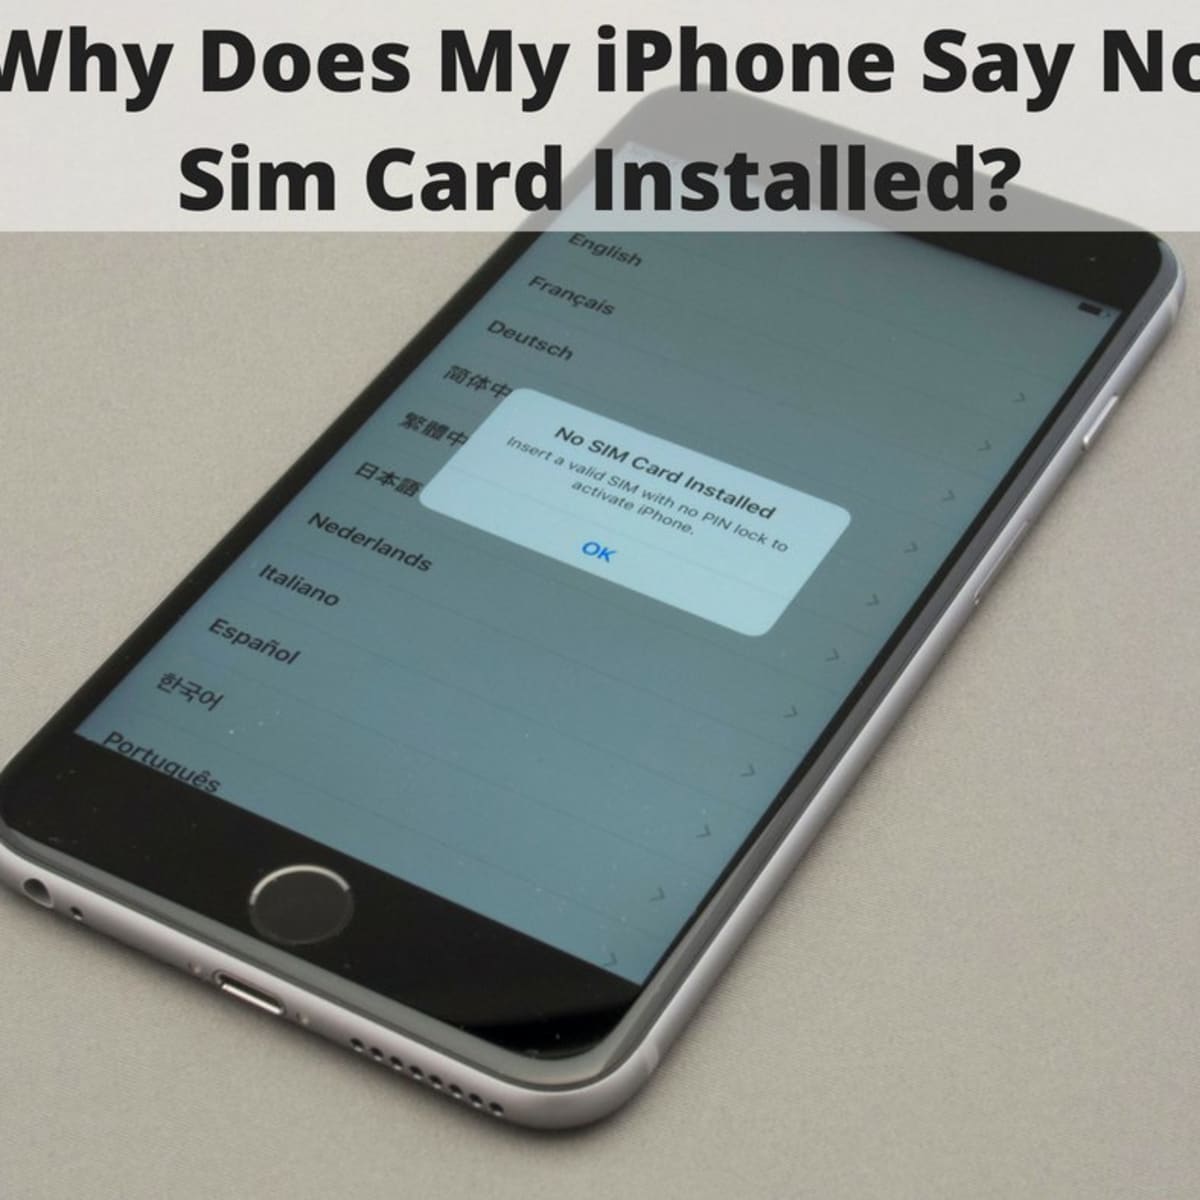 why does my iphone say no sim card installed